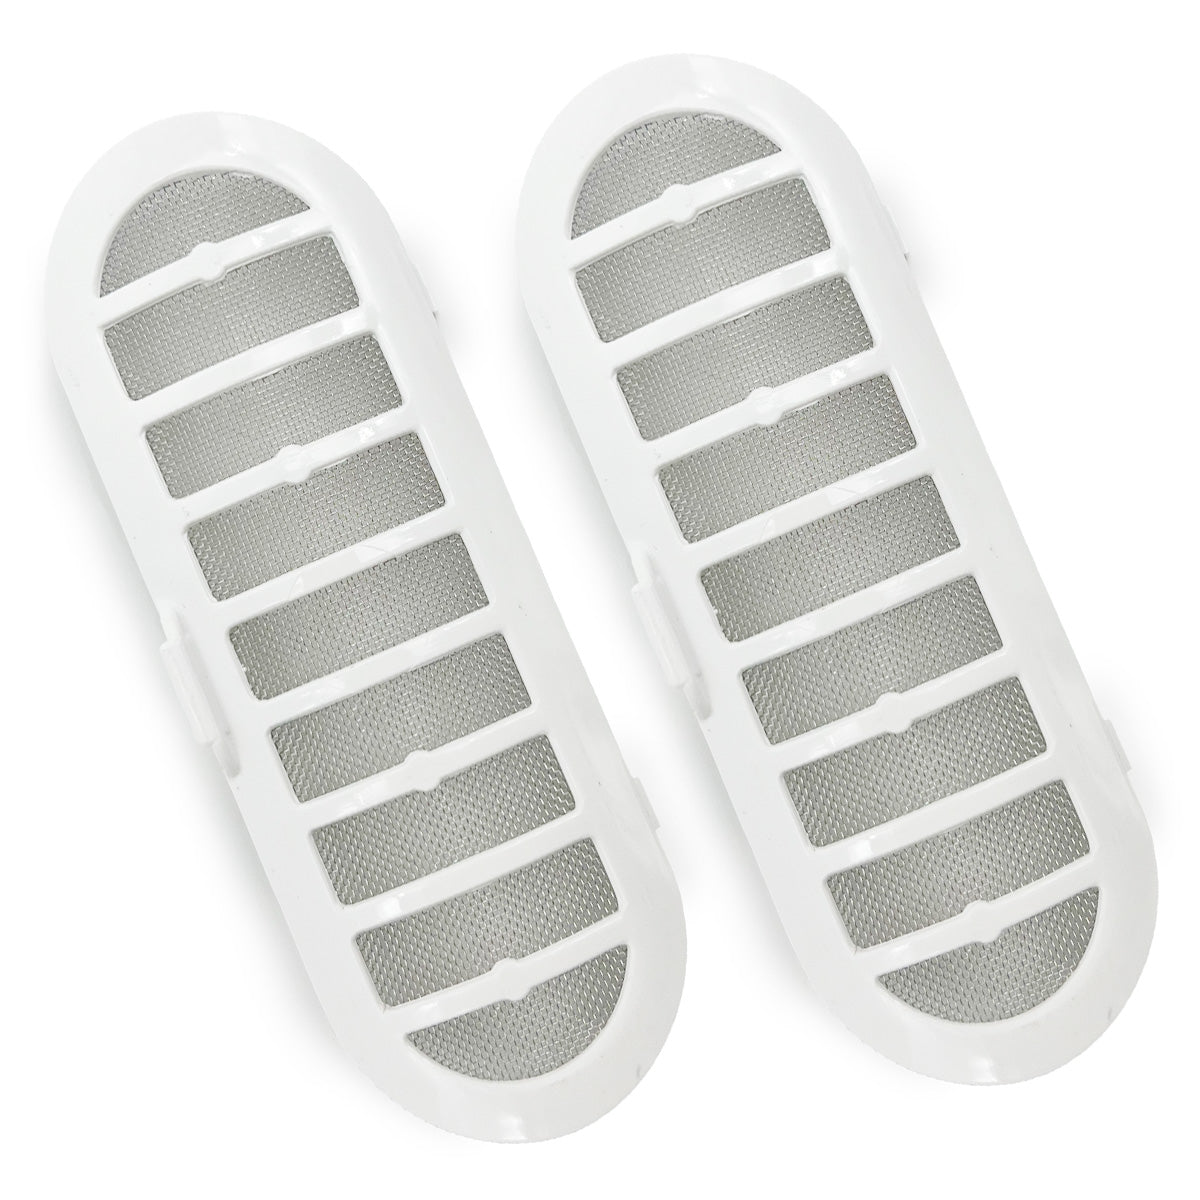 Side Vents for OxLife Liberty 2 Portable Oxygen Concentrator (1-Pair)